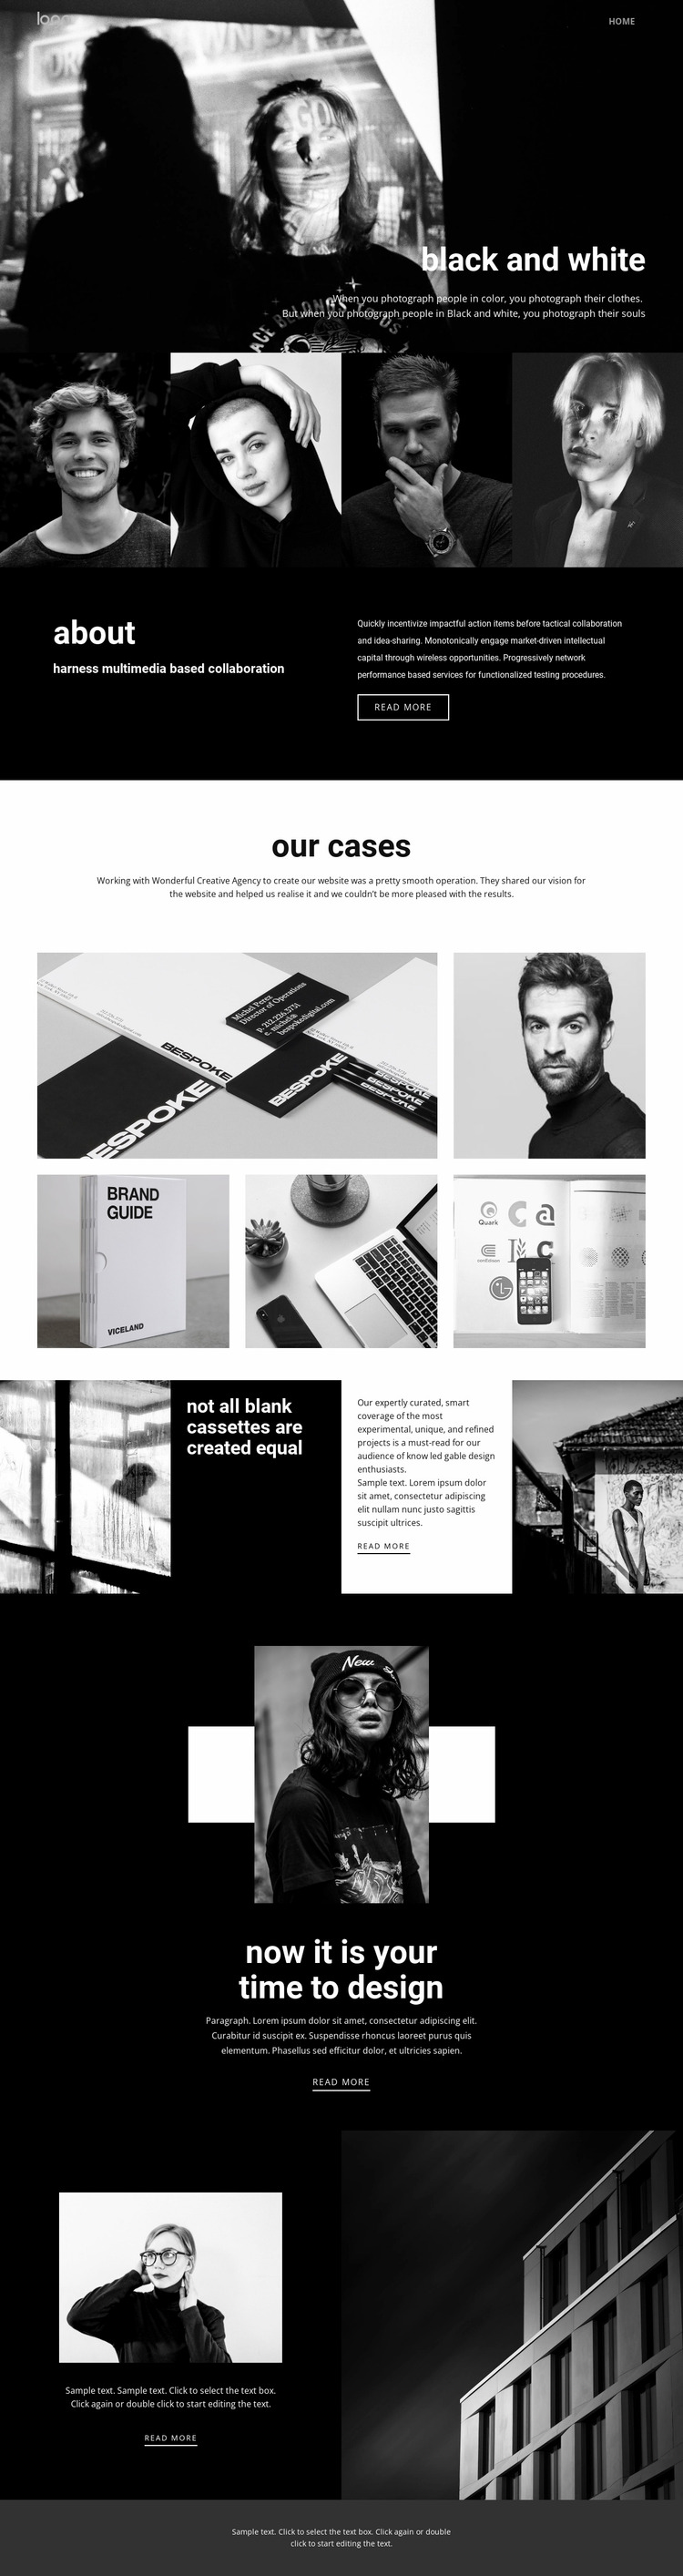 Black and white colors of art Website Mockup